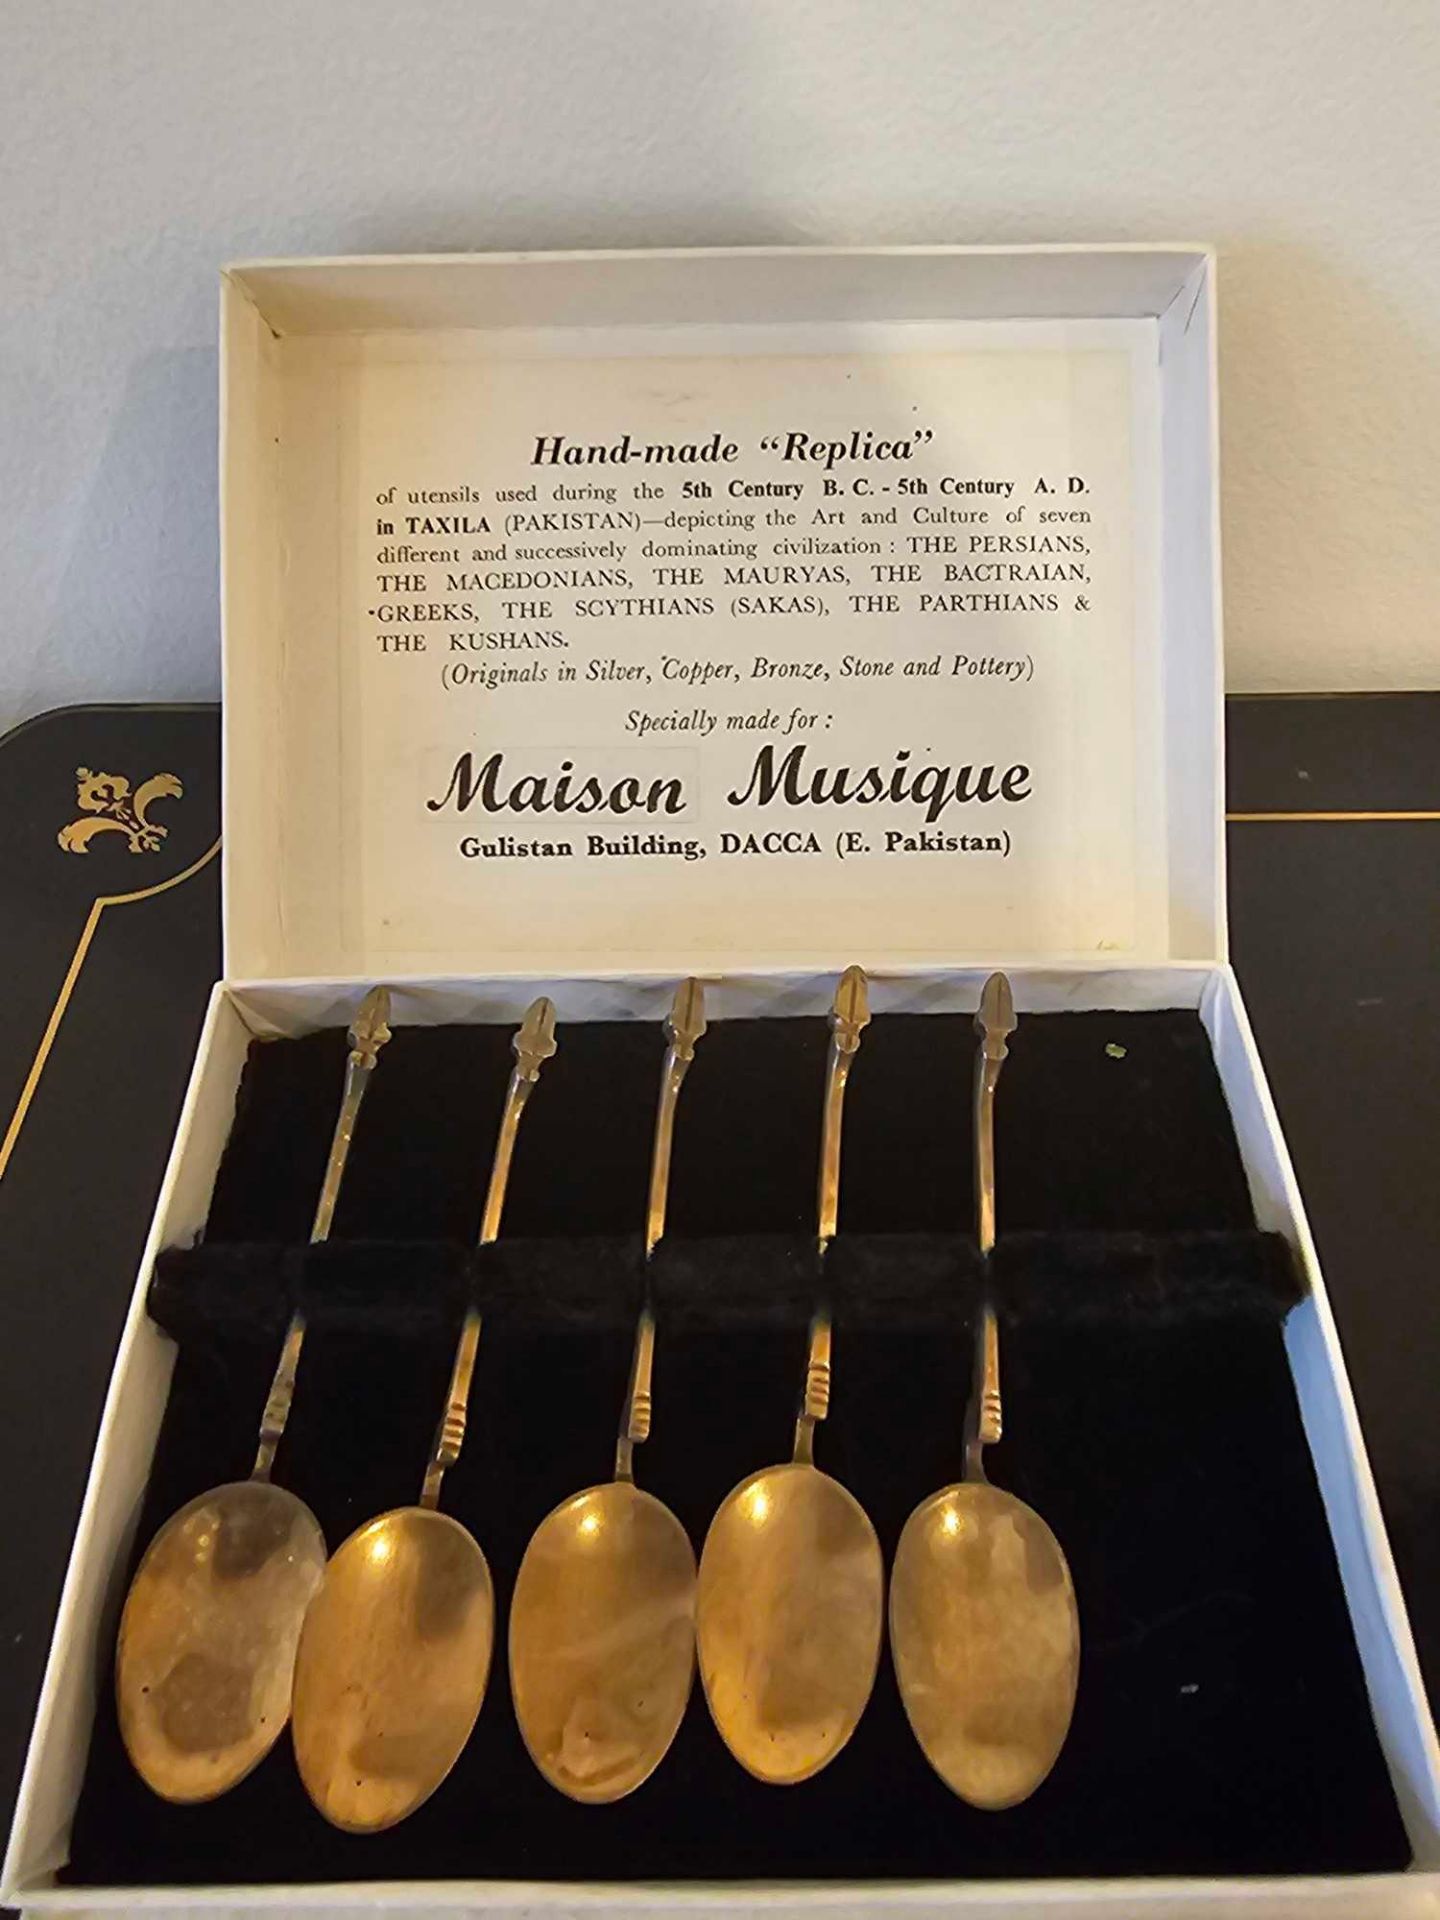 Maison Musique Hand Made Replica - A Boxed Set Of Utensils Used In The 5th Century In Taxila - Image 2 of 6